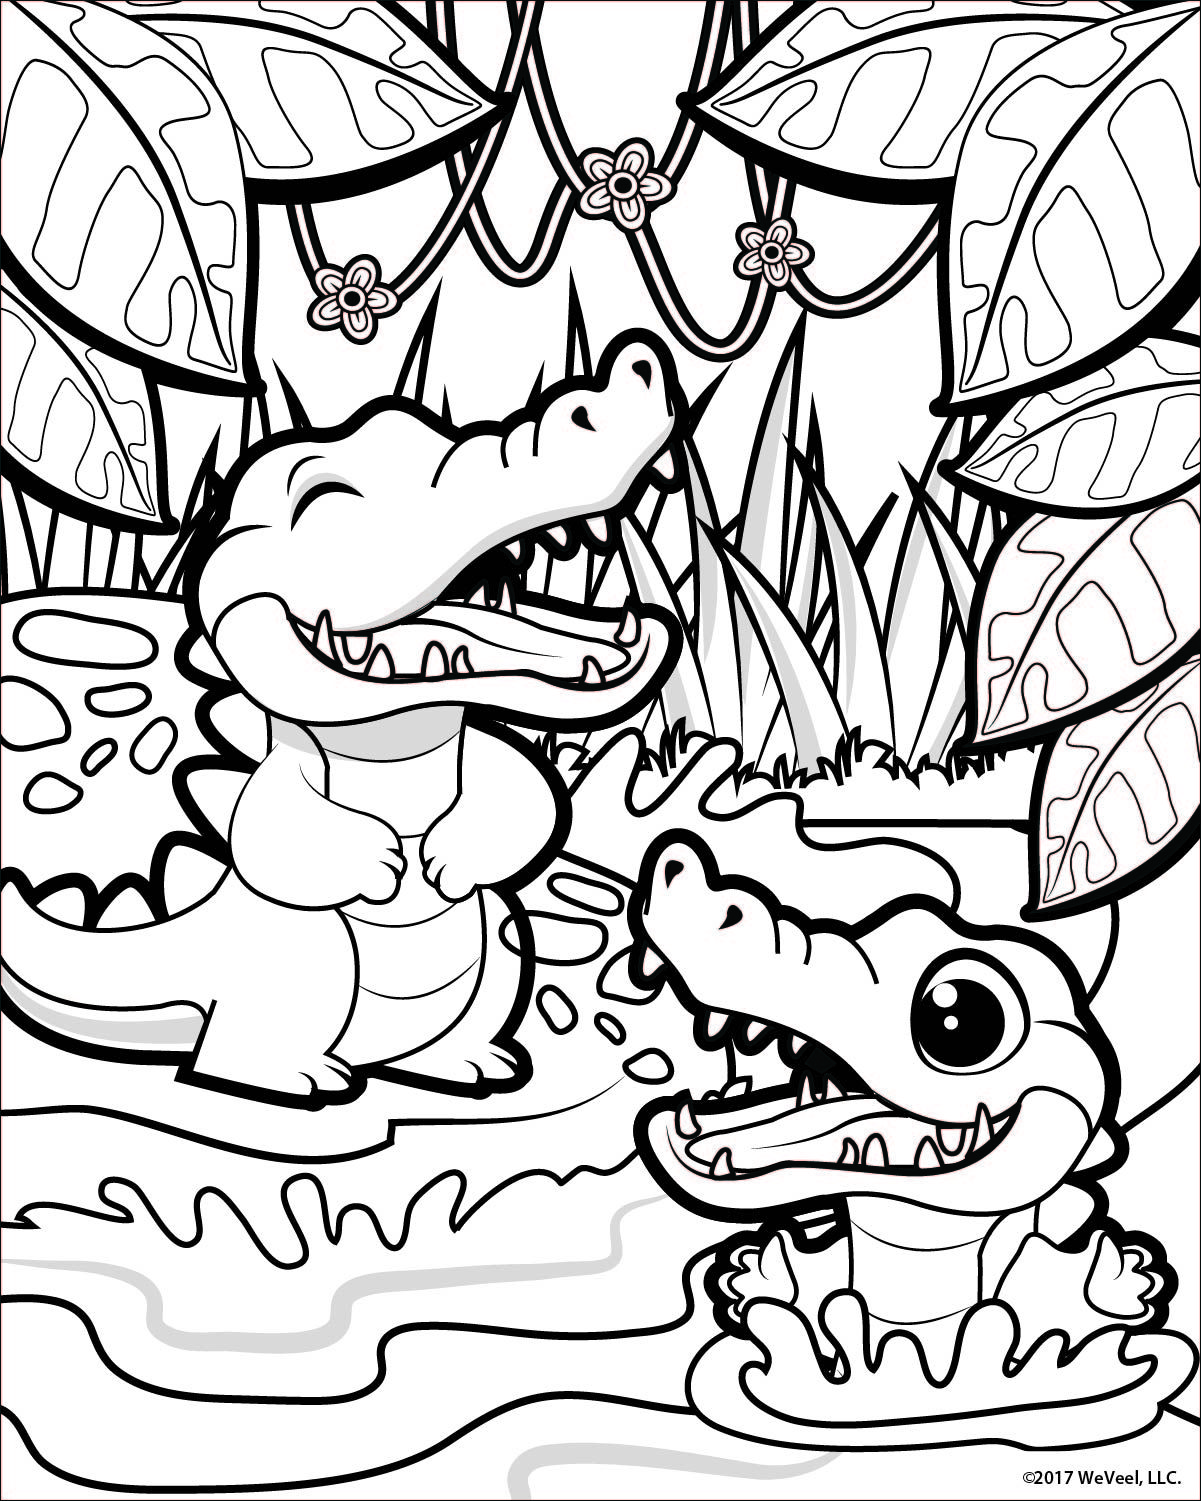 jungle-coloring-pages-14-coloring-kids-jungle-coloring-pages-best